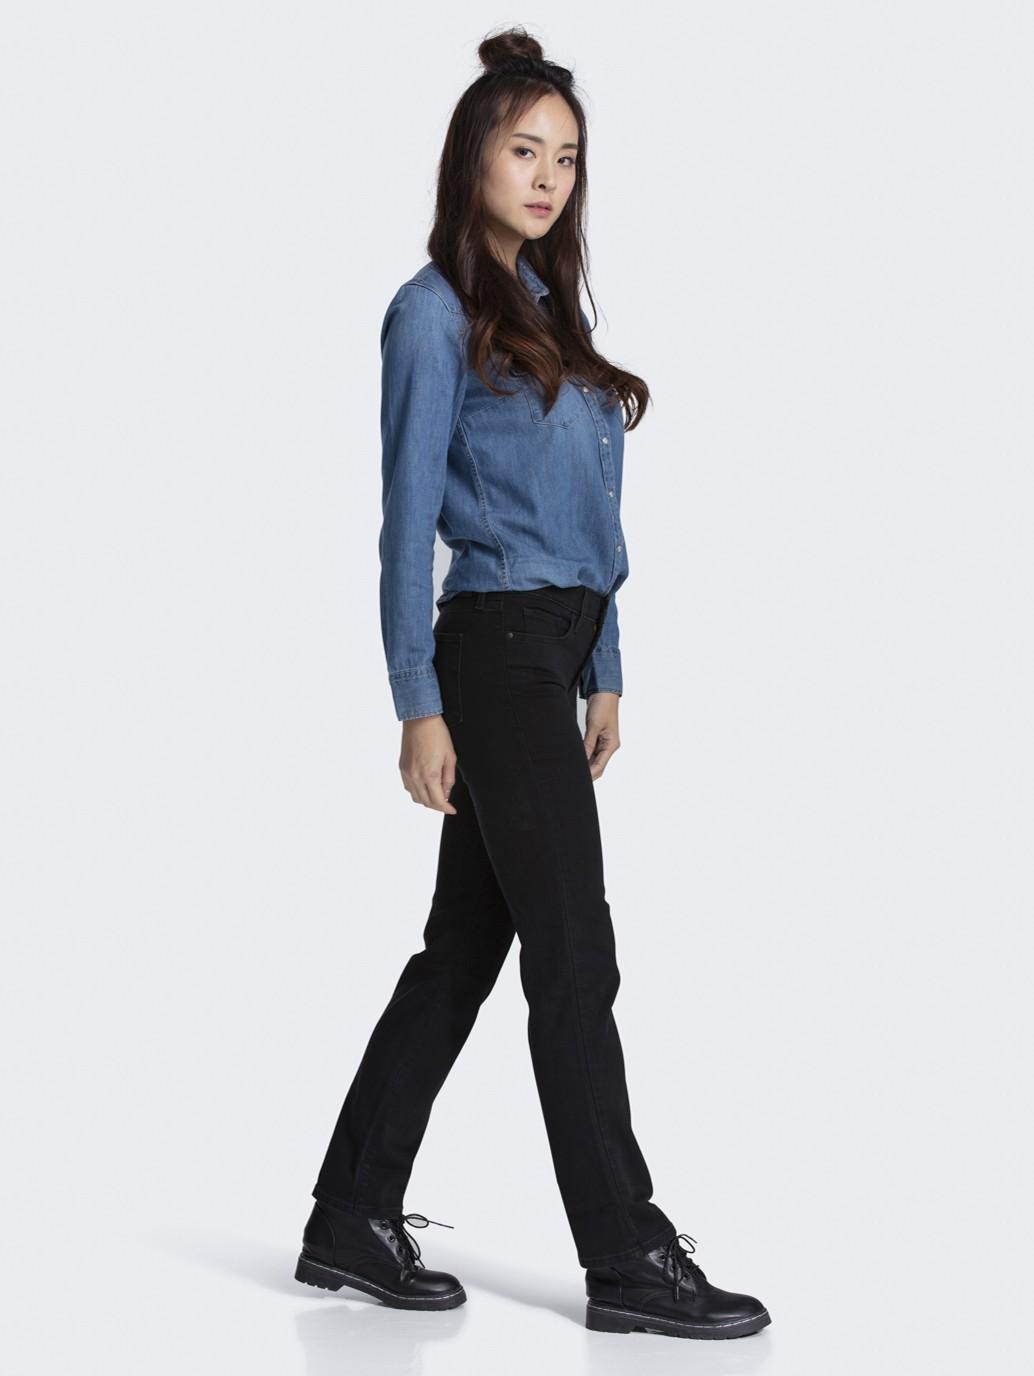 levis malaysia Levis 314 Shaping Straight Jeans 196310000 03 Side